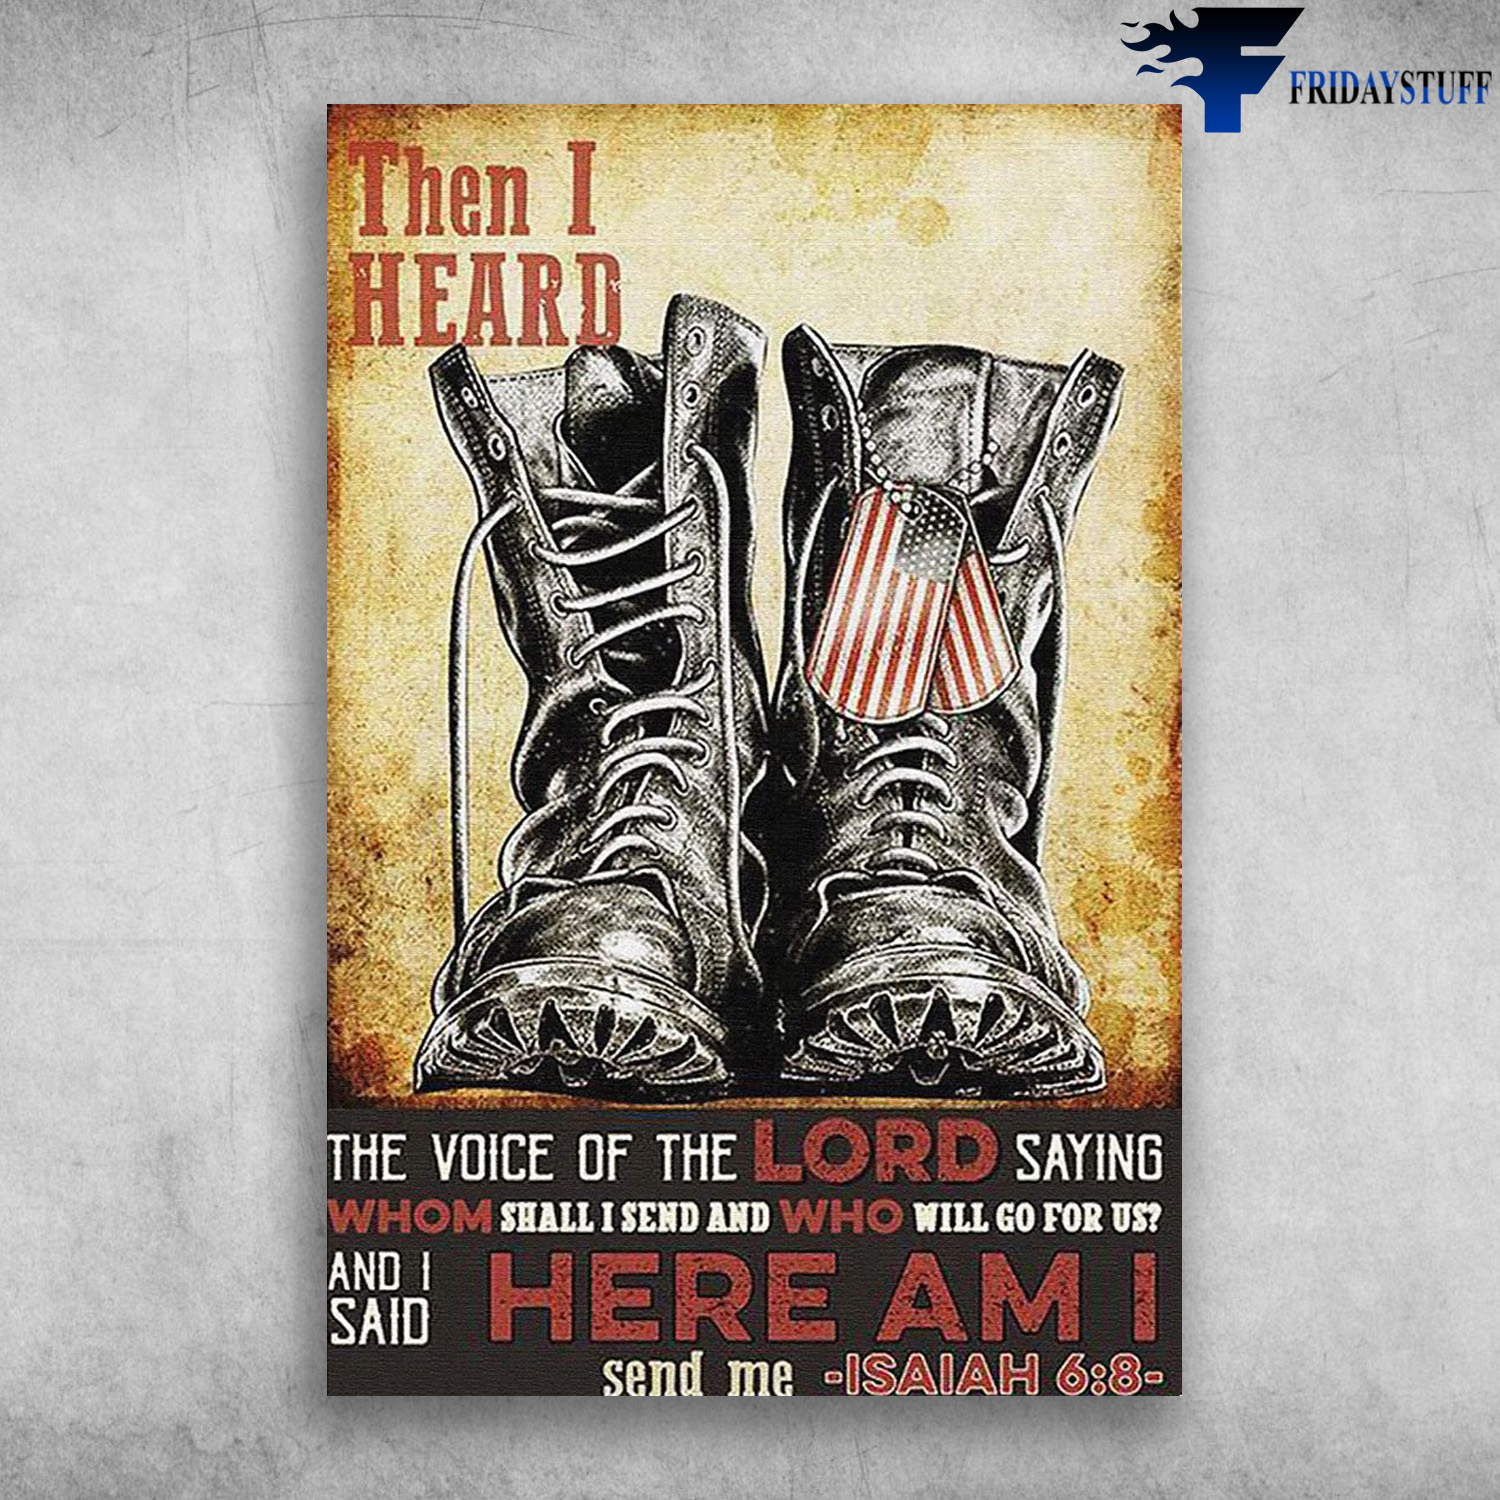 Then I Heard The Voice Of The Lord Saying Whom Shall I Send And Who Will Go For Us - American Soldier Shoes